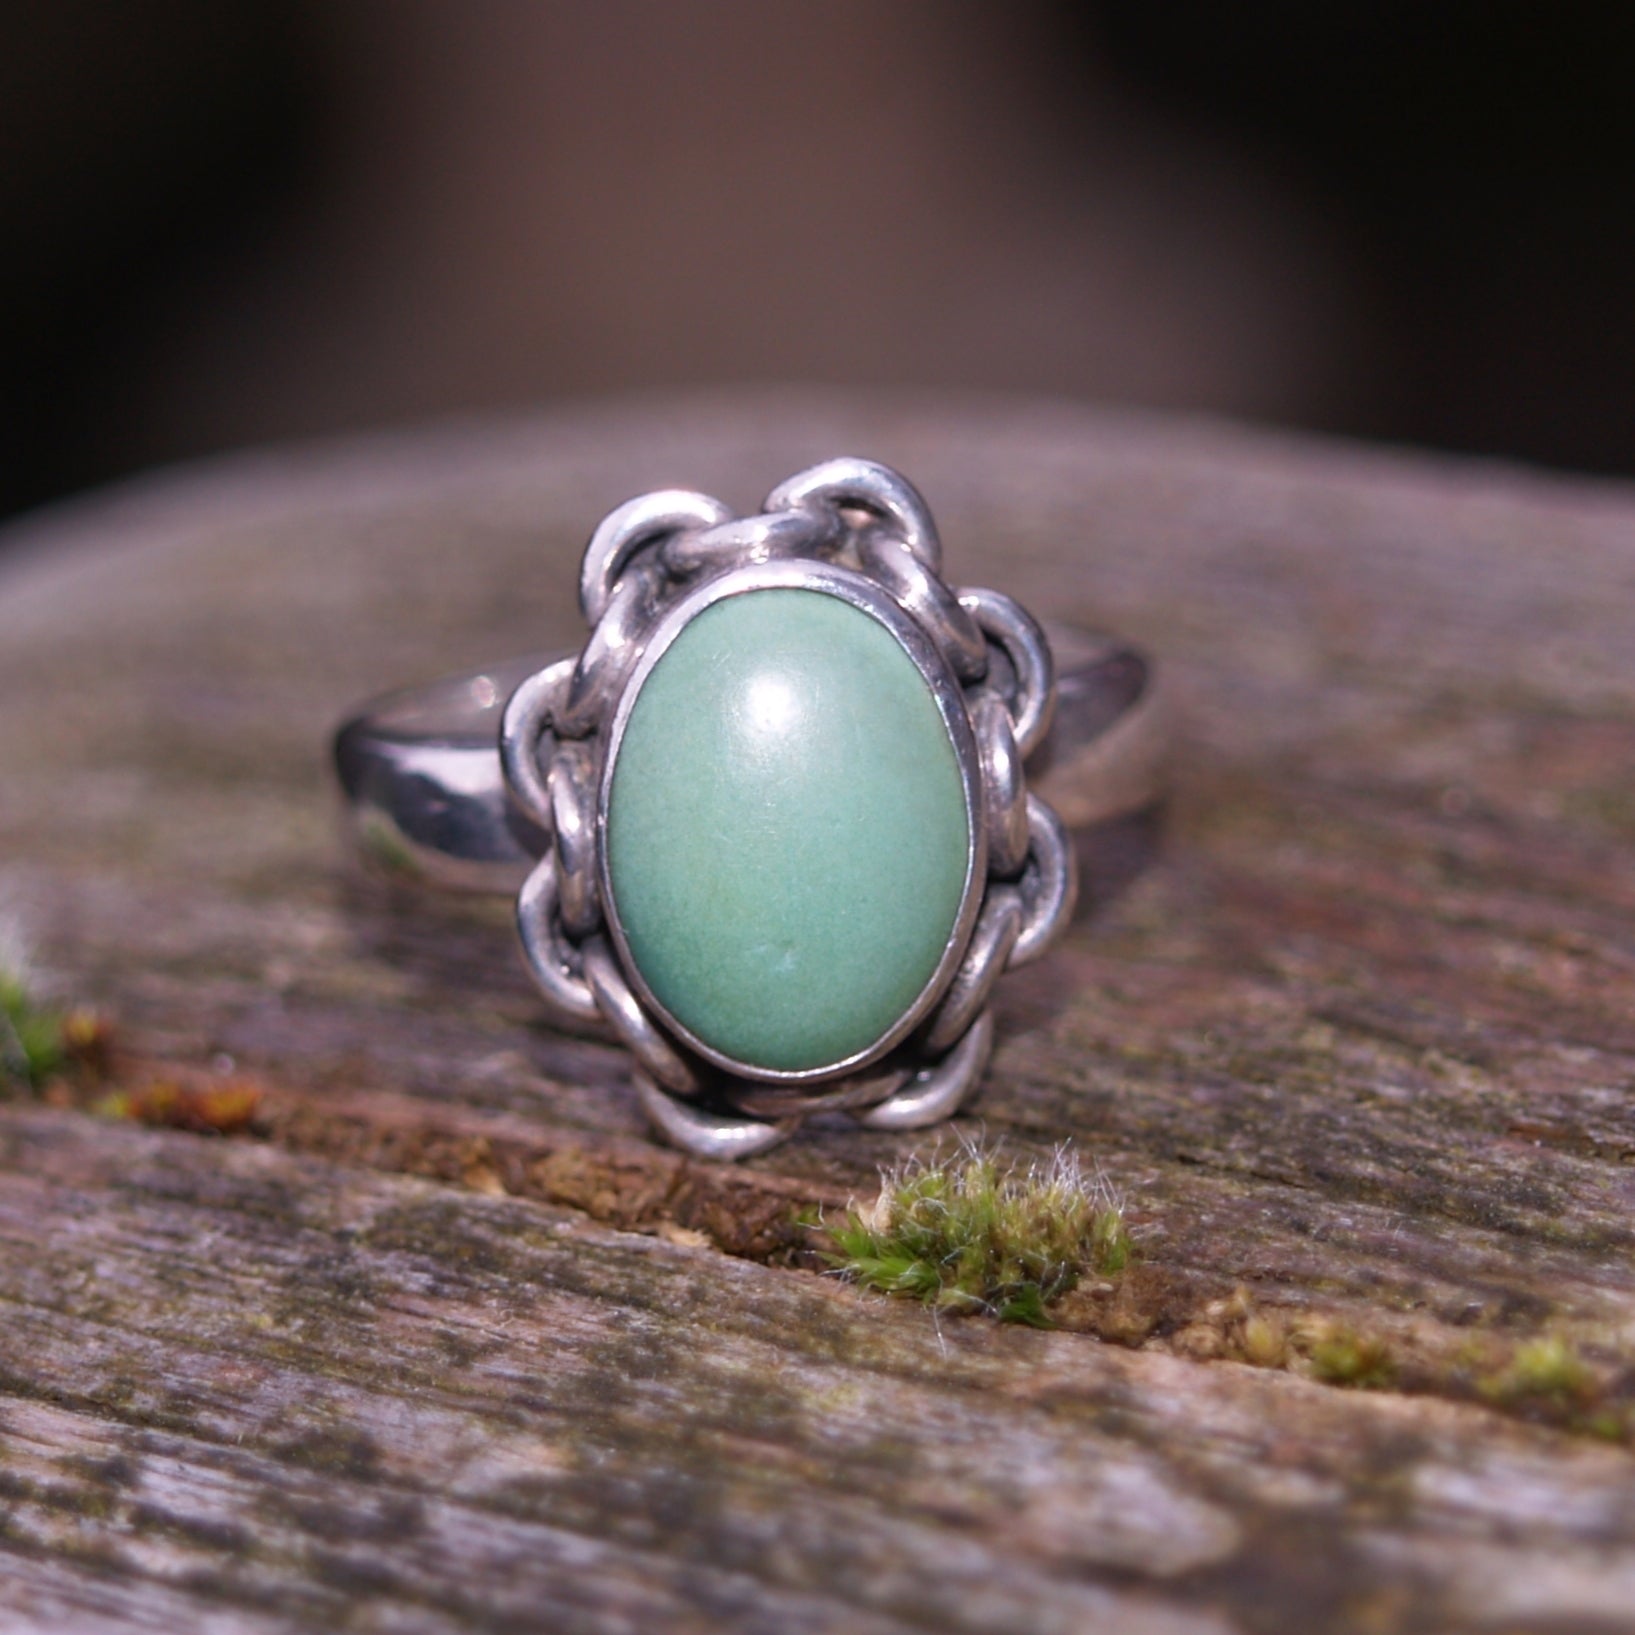 Vintage Turquoise Sterling Silver Ring.